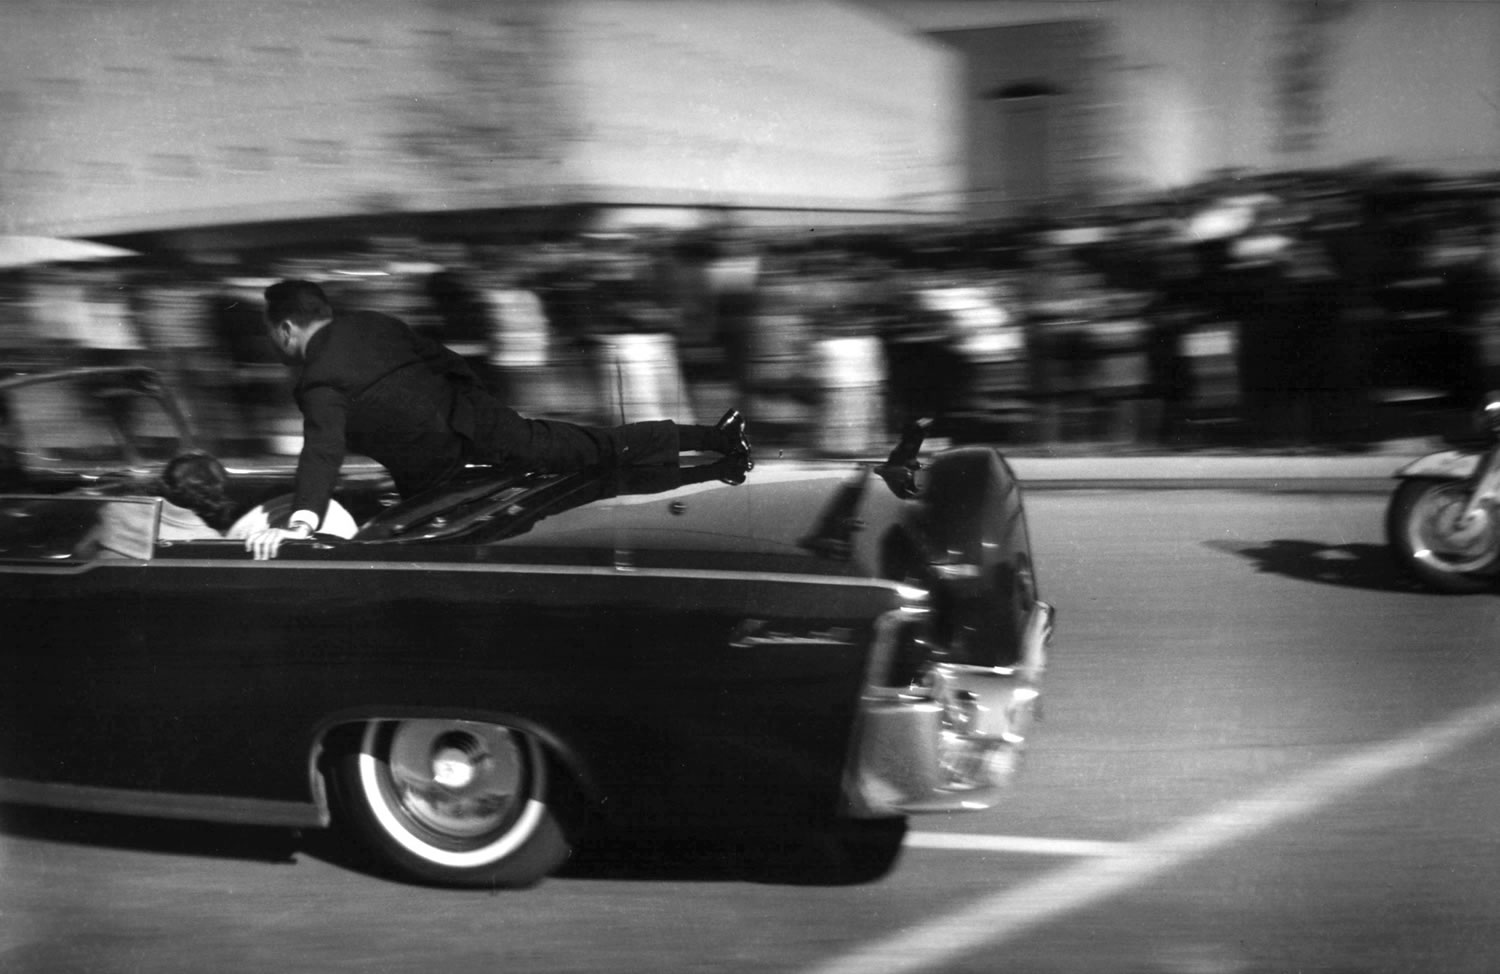 The limousine carrying President John F. Kennedy races toward the hospital seconds after he was shot in Dallas on Nov. 22, 1963. Secret Service agent Clint Hill is riding on the back of the car. As Nellie Connally, wife of Texas Gov.